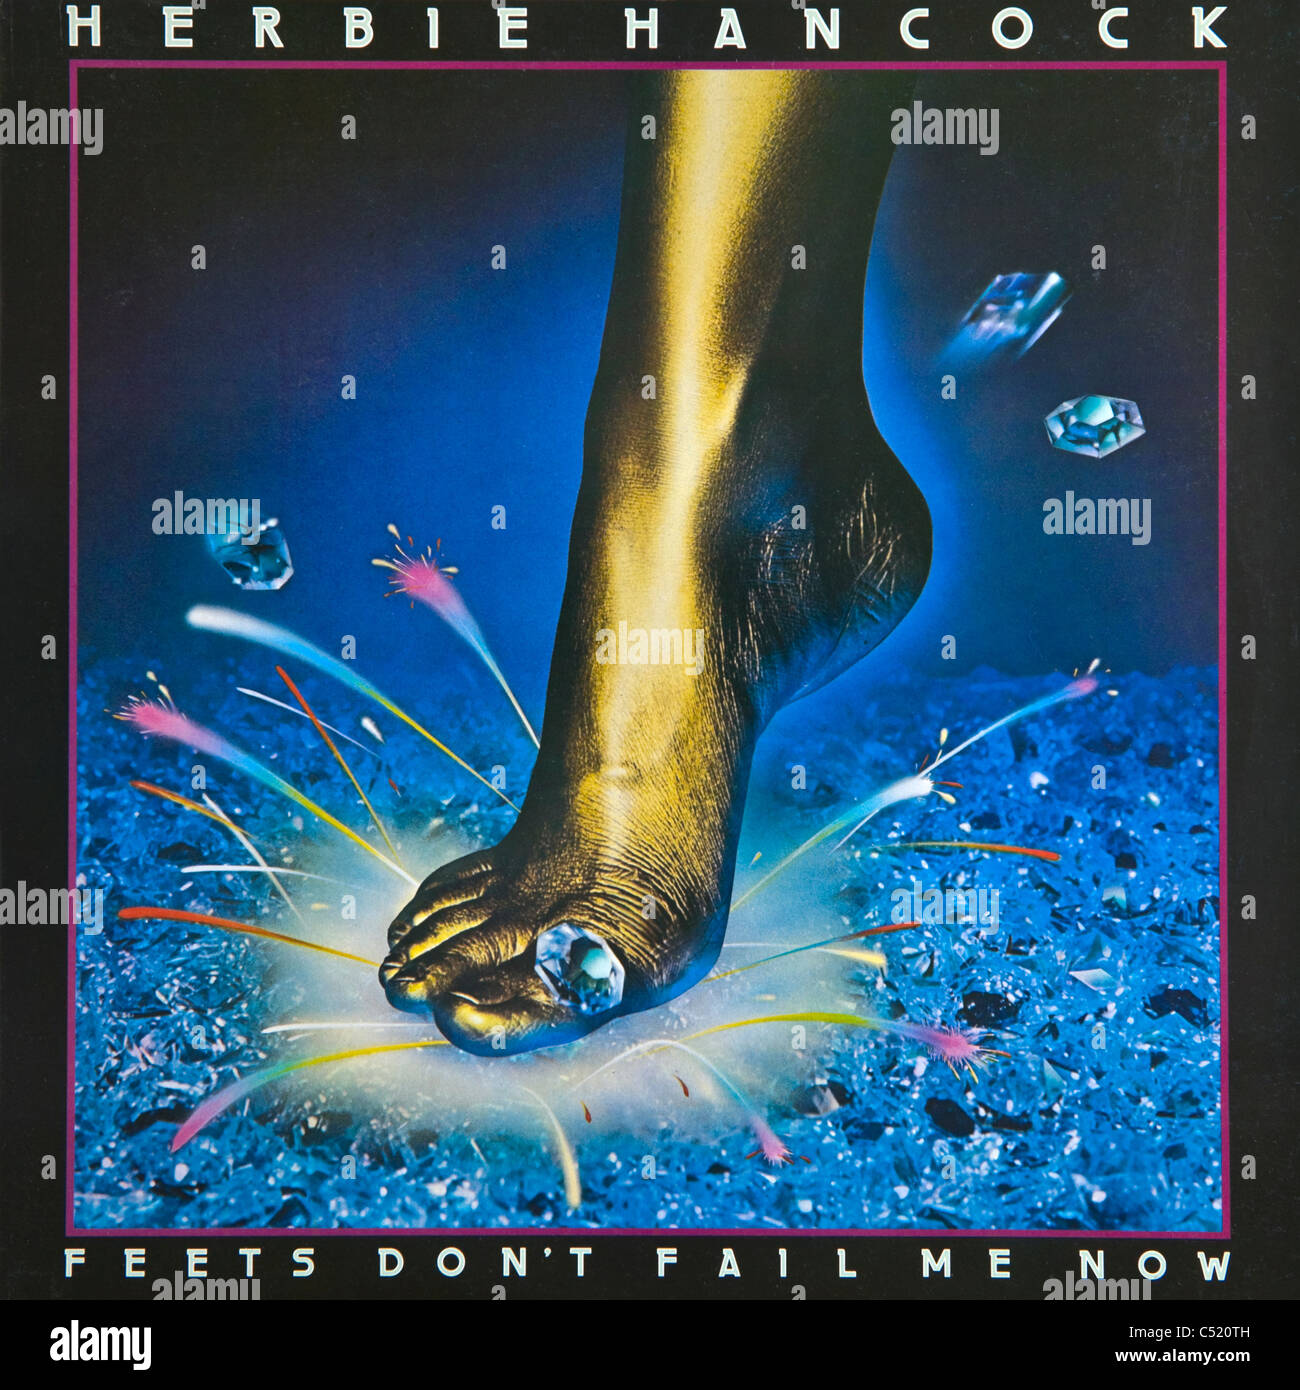 Cover of vinyl album Feets Don't Fail Me Now by Herbie Hancock released 1979 on CBS Records Stock Photo